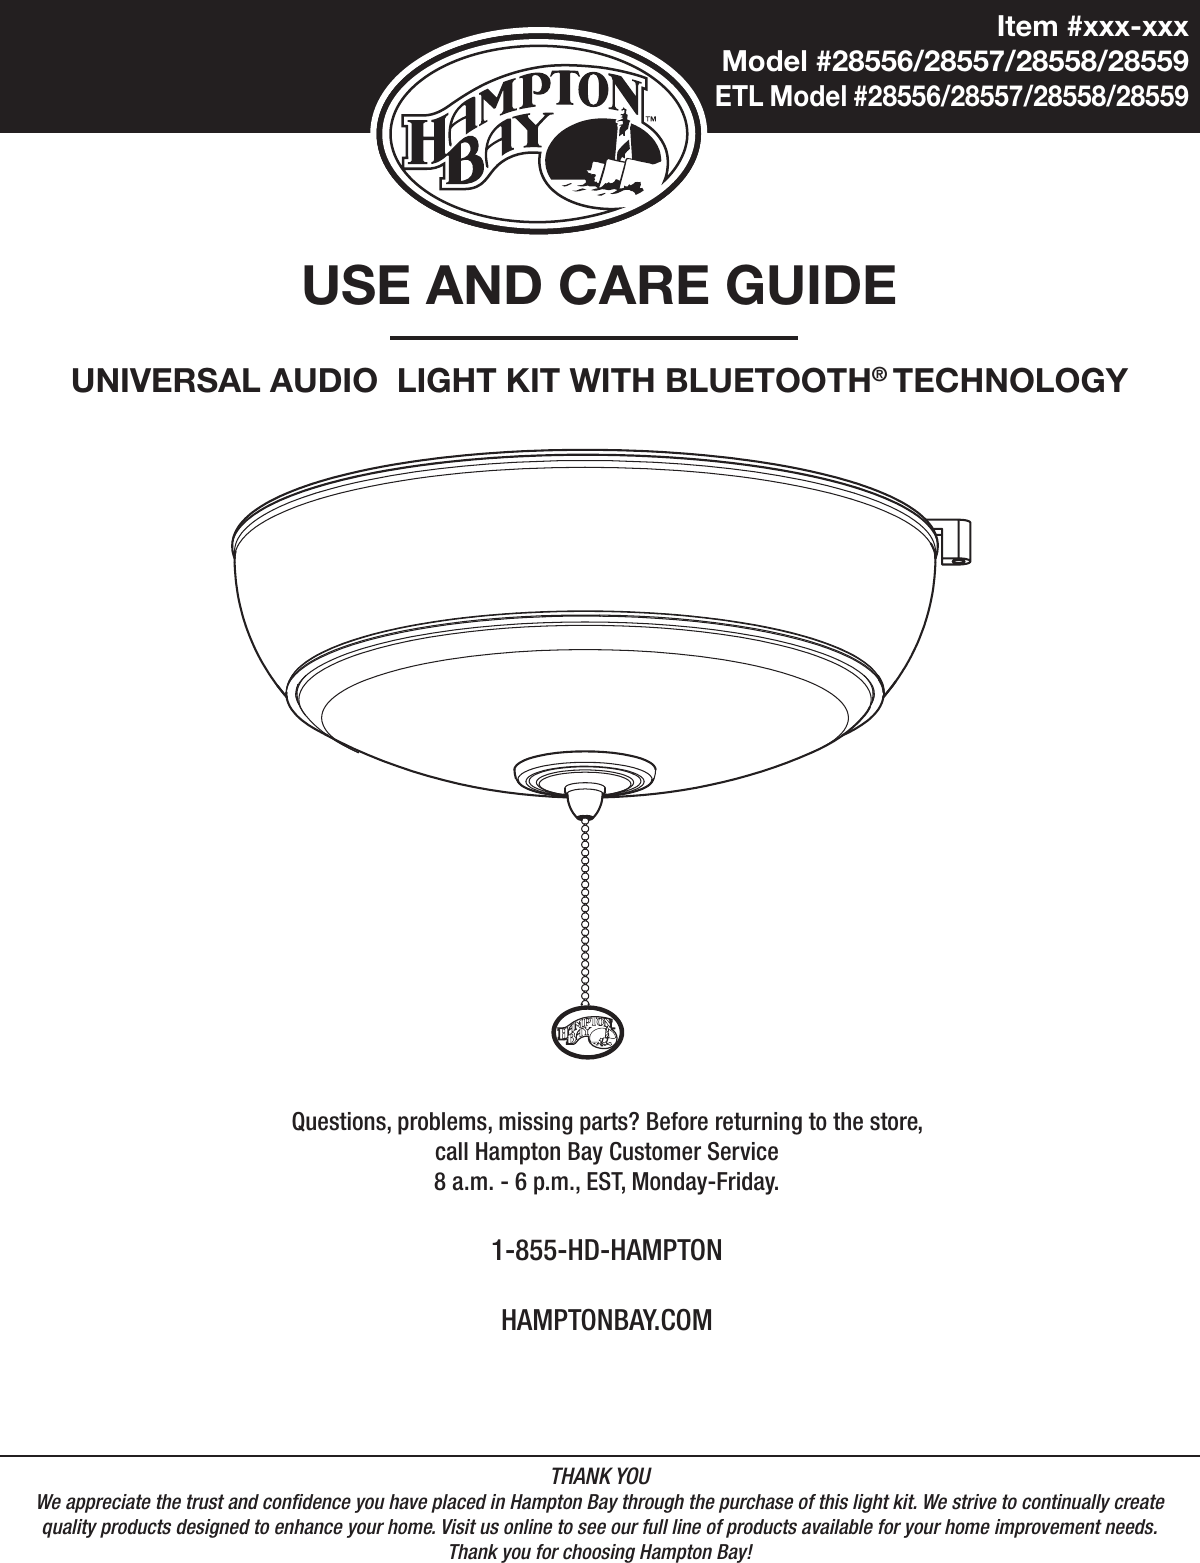 Item #xxx-xxxModel #28556/28557/28558/28559ETL Model #28556/28557/28558/28559USE AND CARE GUIDEUNIVERSAL AUDIO  LIGHT KIT WITH BLUETOOTH® TECHNOLOGYQuestions, problems, missing parts? Before returning to the store,call Hampton Bay Customer Service8 a.m. - 6 p.m., EST, Monday-Friday.1-855-HD-HAMPTONHAMPTONBAY.COMTHANK YOUWe appreciate the trust and condence you have placed in Hampton Bay through the purchase of this light kit. We strive to continually createquality products designed to enhance your home. Visit us online to see our full line of products available for your home improvement needs. Thank you for choosing Hampton Bay!